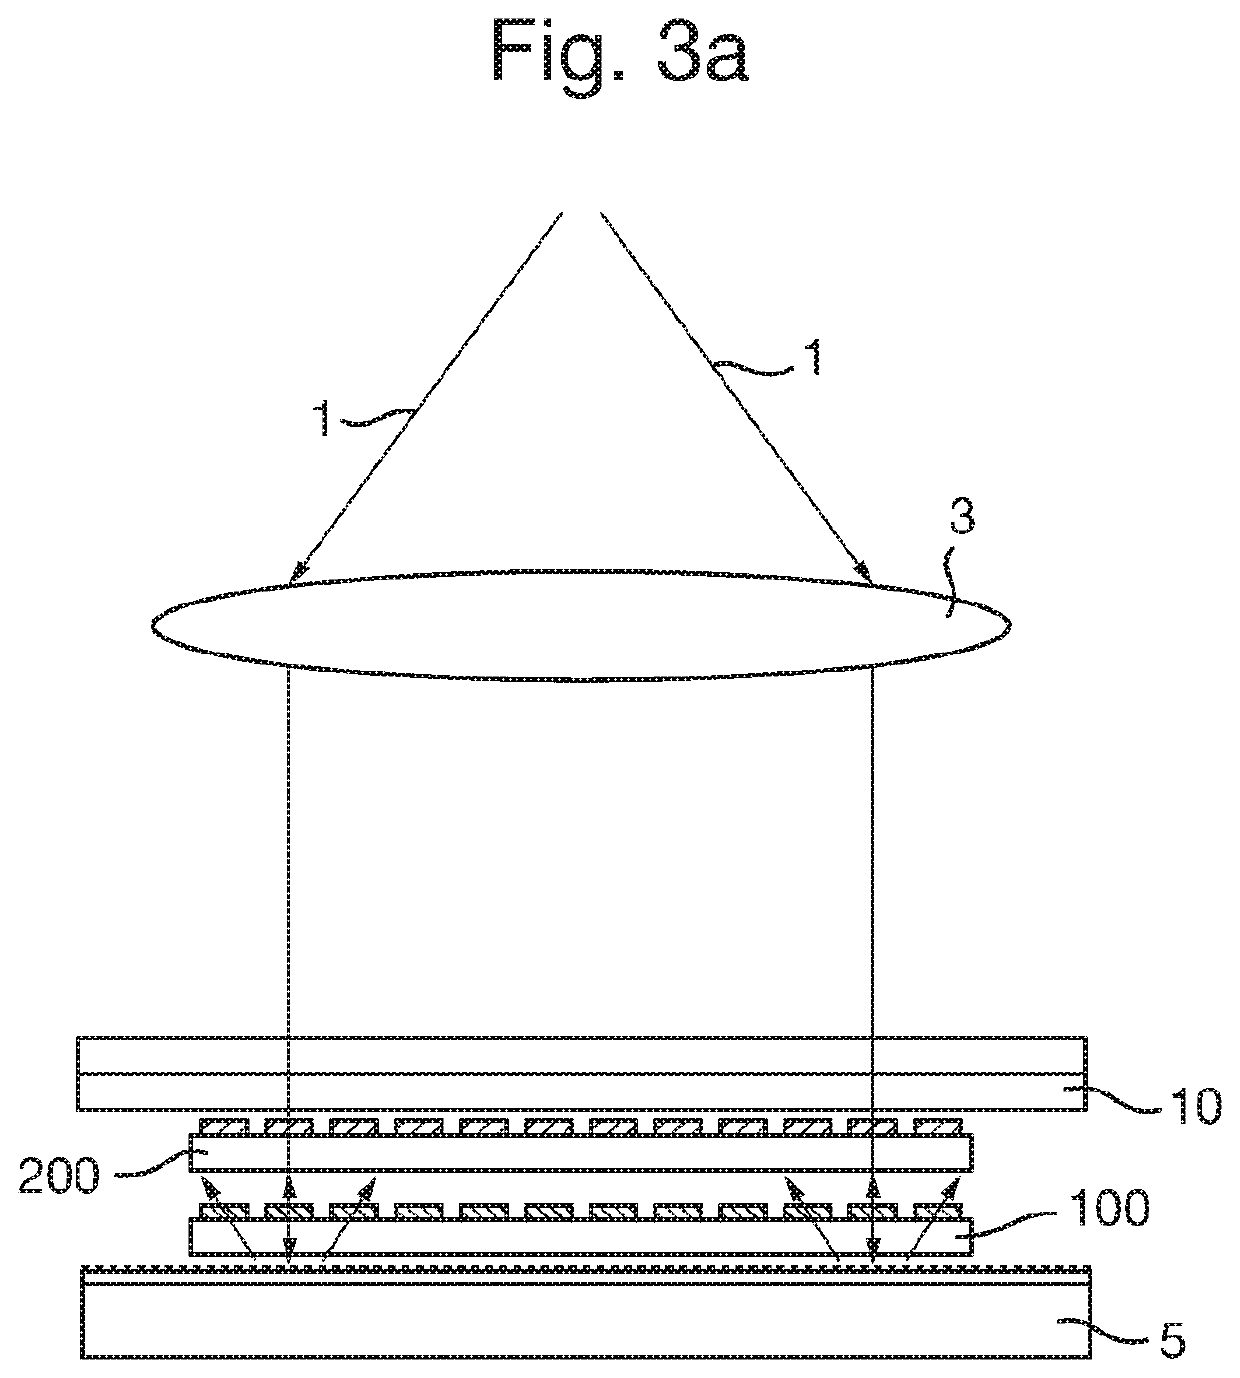 Holographic security device and method of manufacture thereof